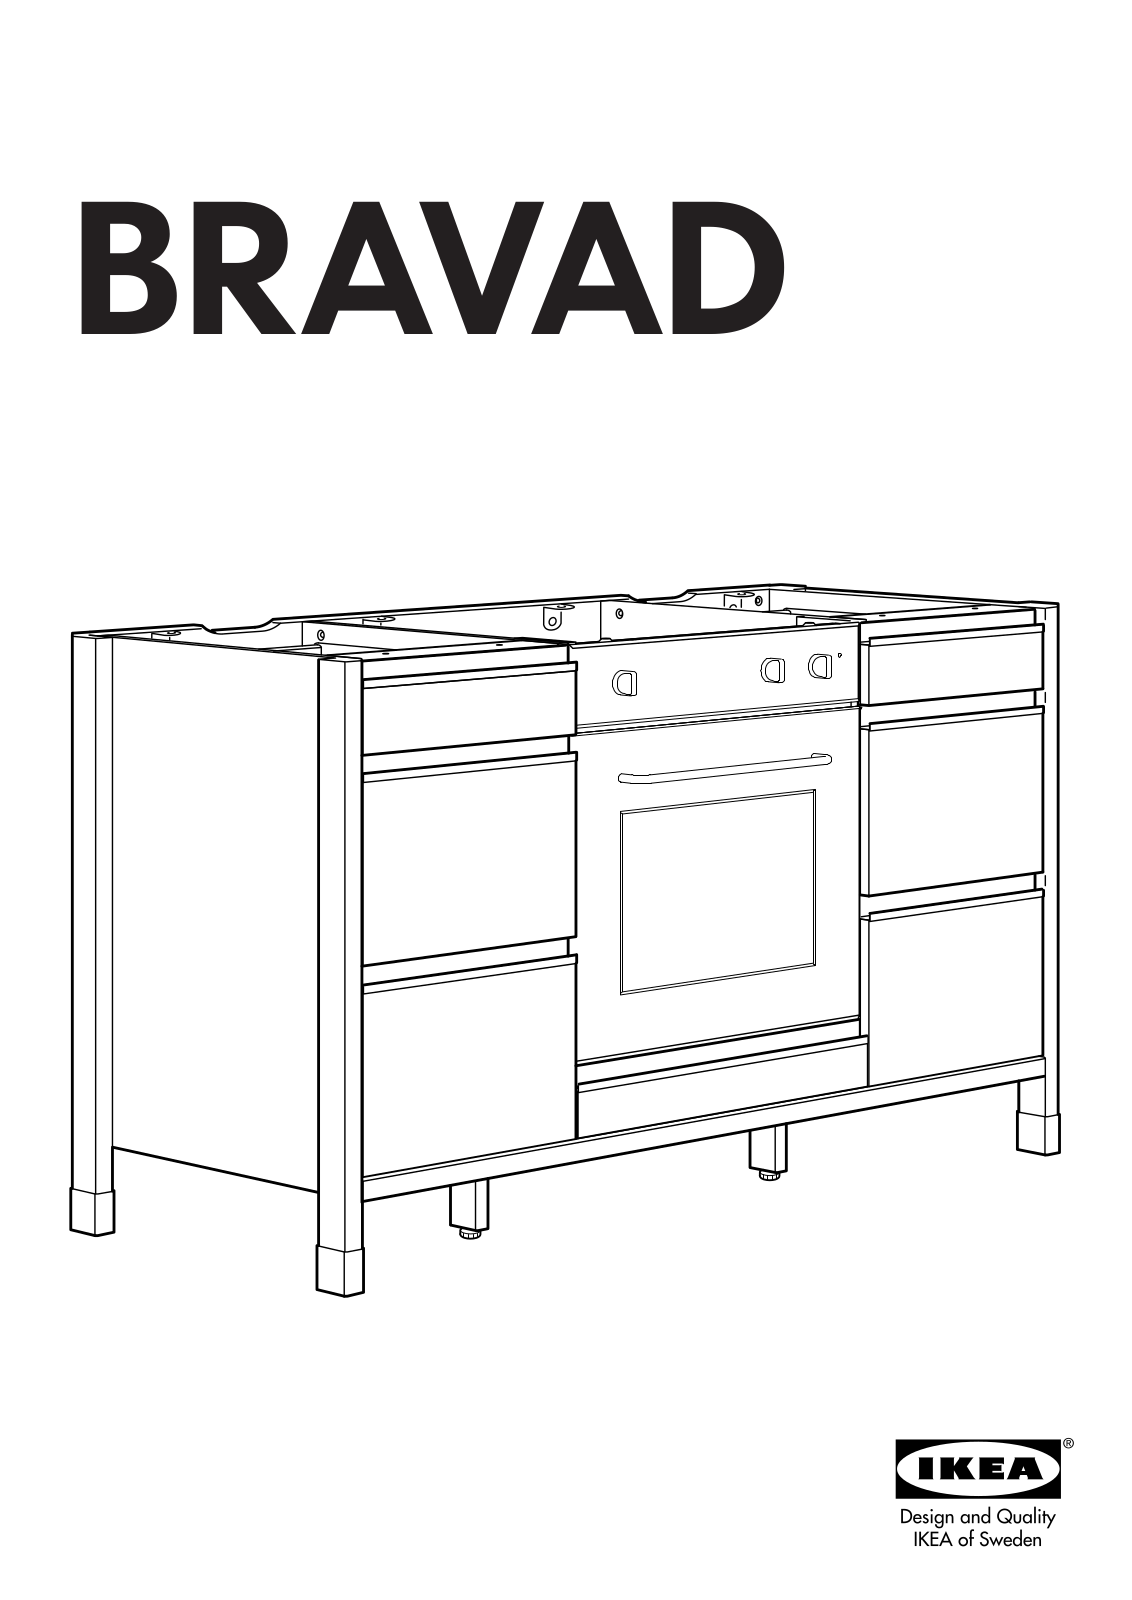 IKEA BRAVAD CABINET-BUILT-IN OVEN-COOKTOP Assembly Instruction